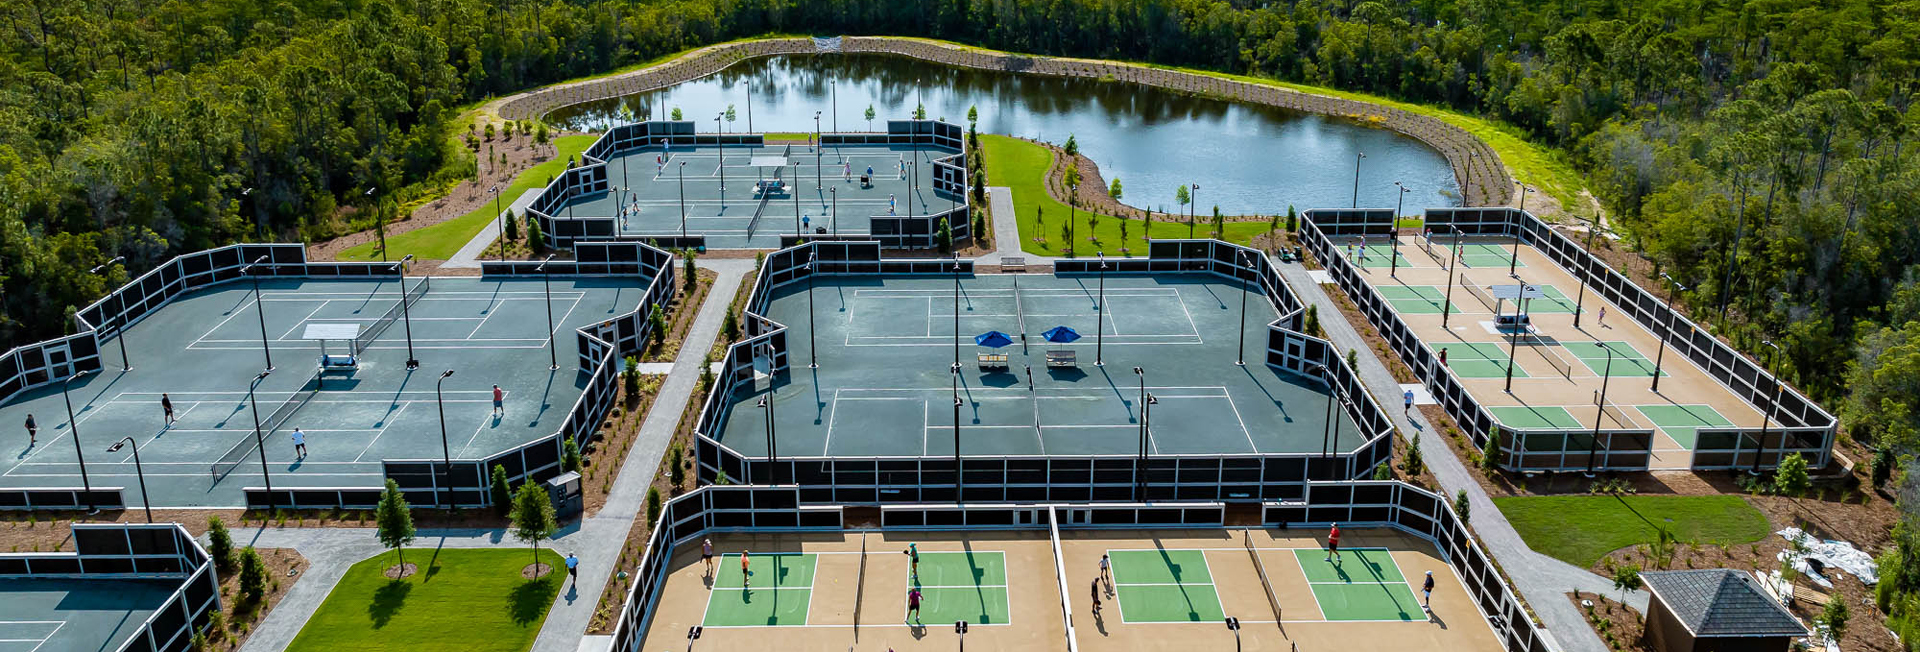 Watersound Club tennis and pickleball amenities at Camp Creek Inn and golf course